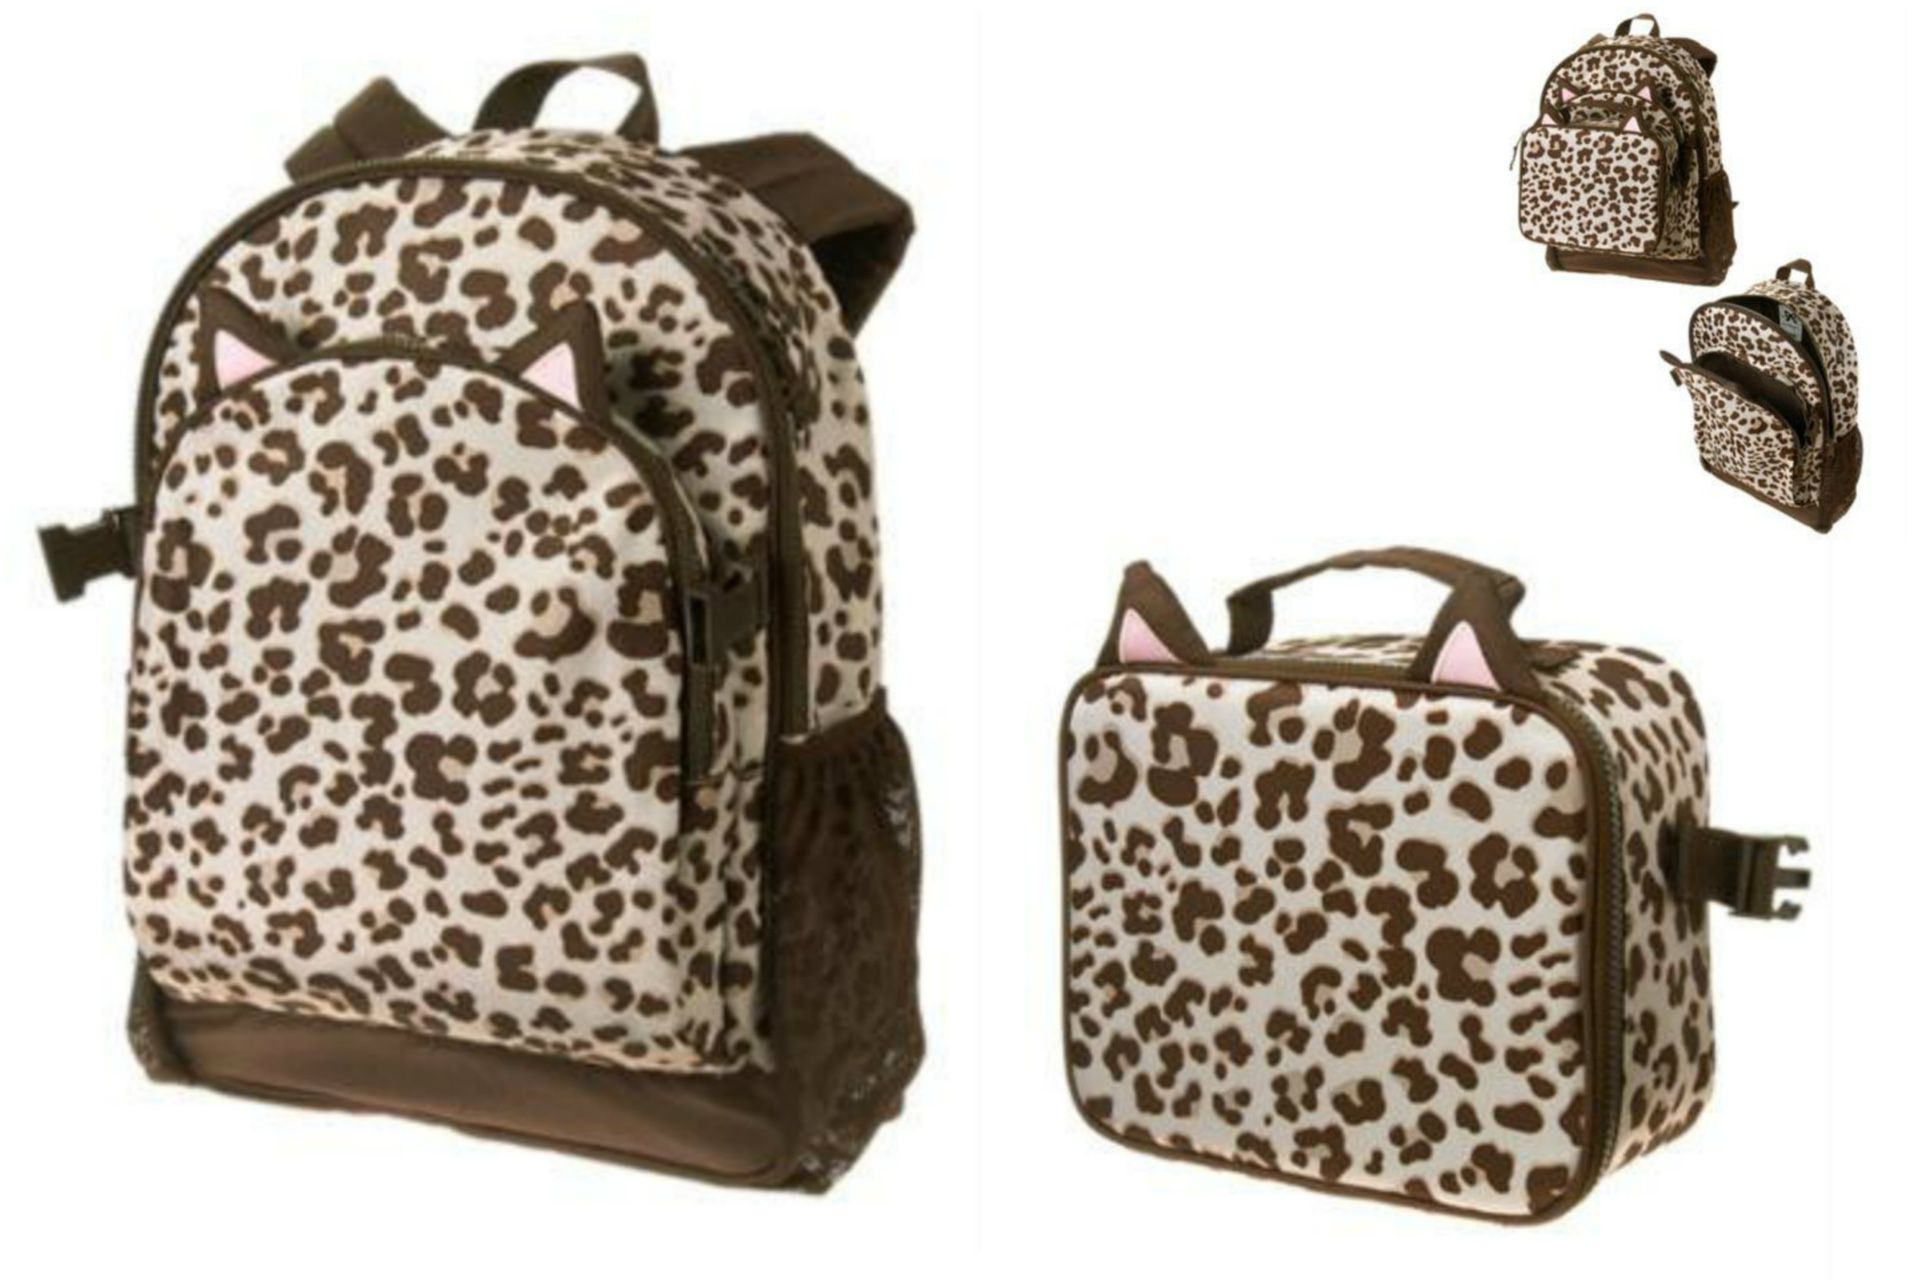 NWT Gymboree Animal Print Backpack & Lunch Box